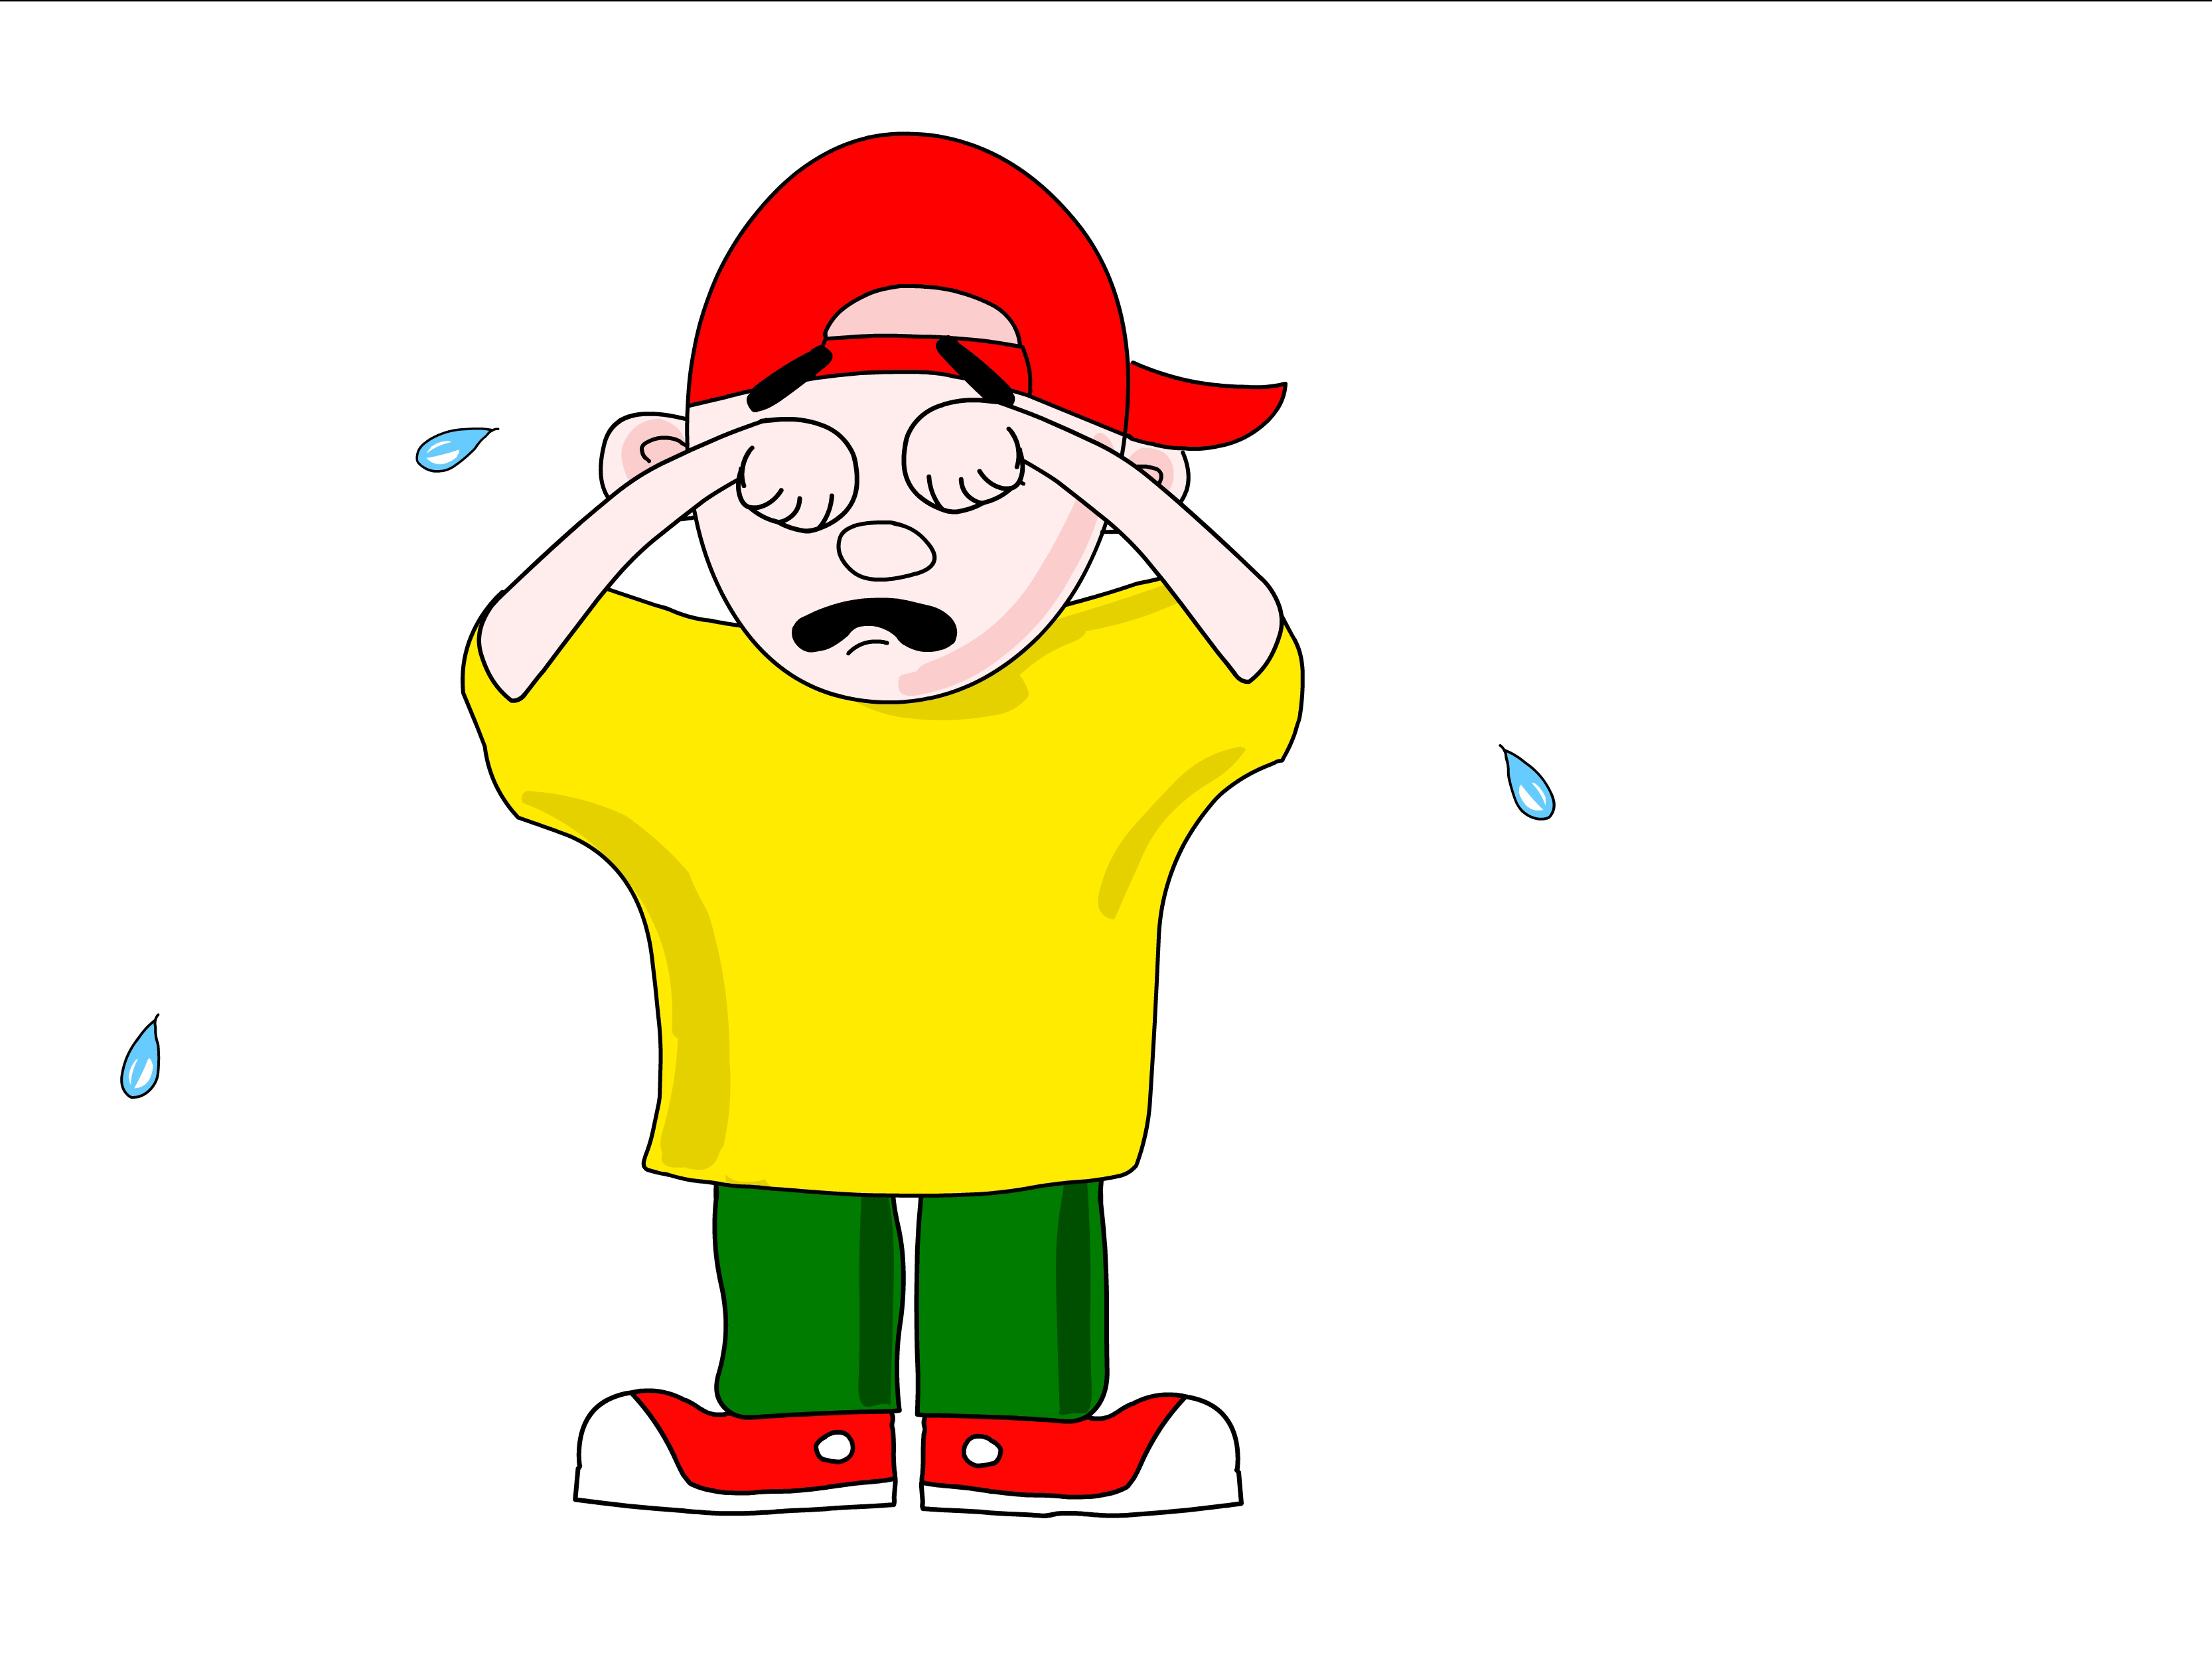 A Cartoon People Crying - ClipArt Best